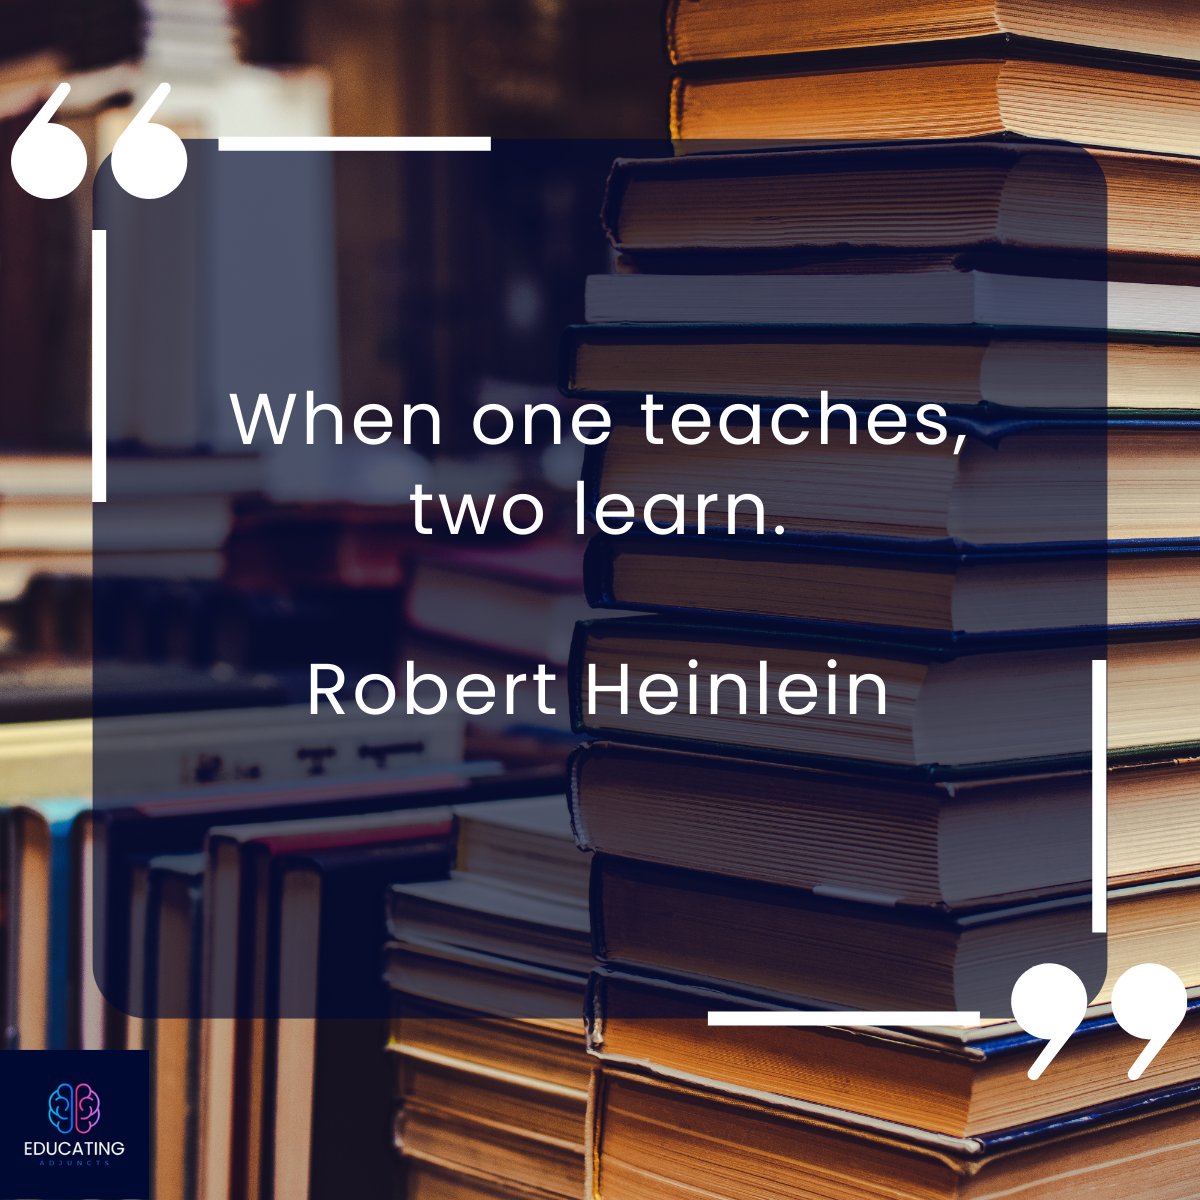 The beauty of teaching is its reciprocity. Each time we educate, we are also on a journey of learning. The exchange of ideas and knowledge fosters growth on both ends of the spectrum. Education is a two-way street. #TeachToLearn